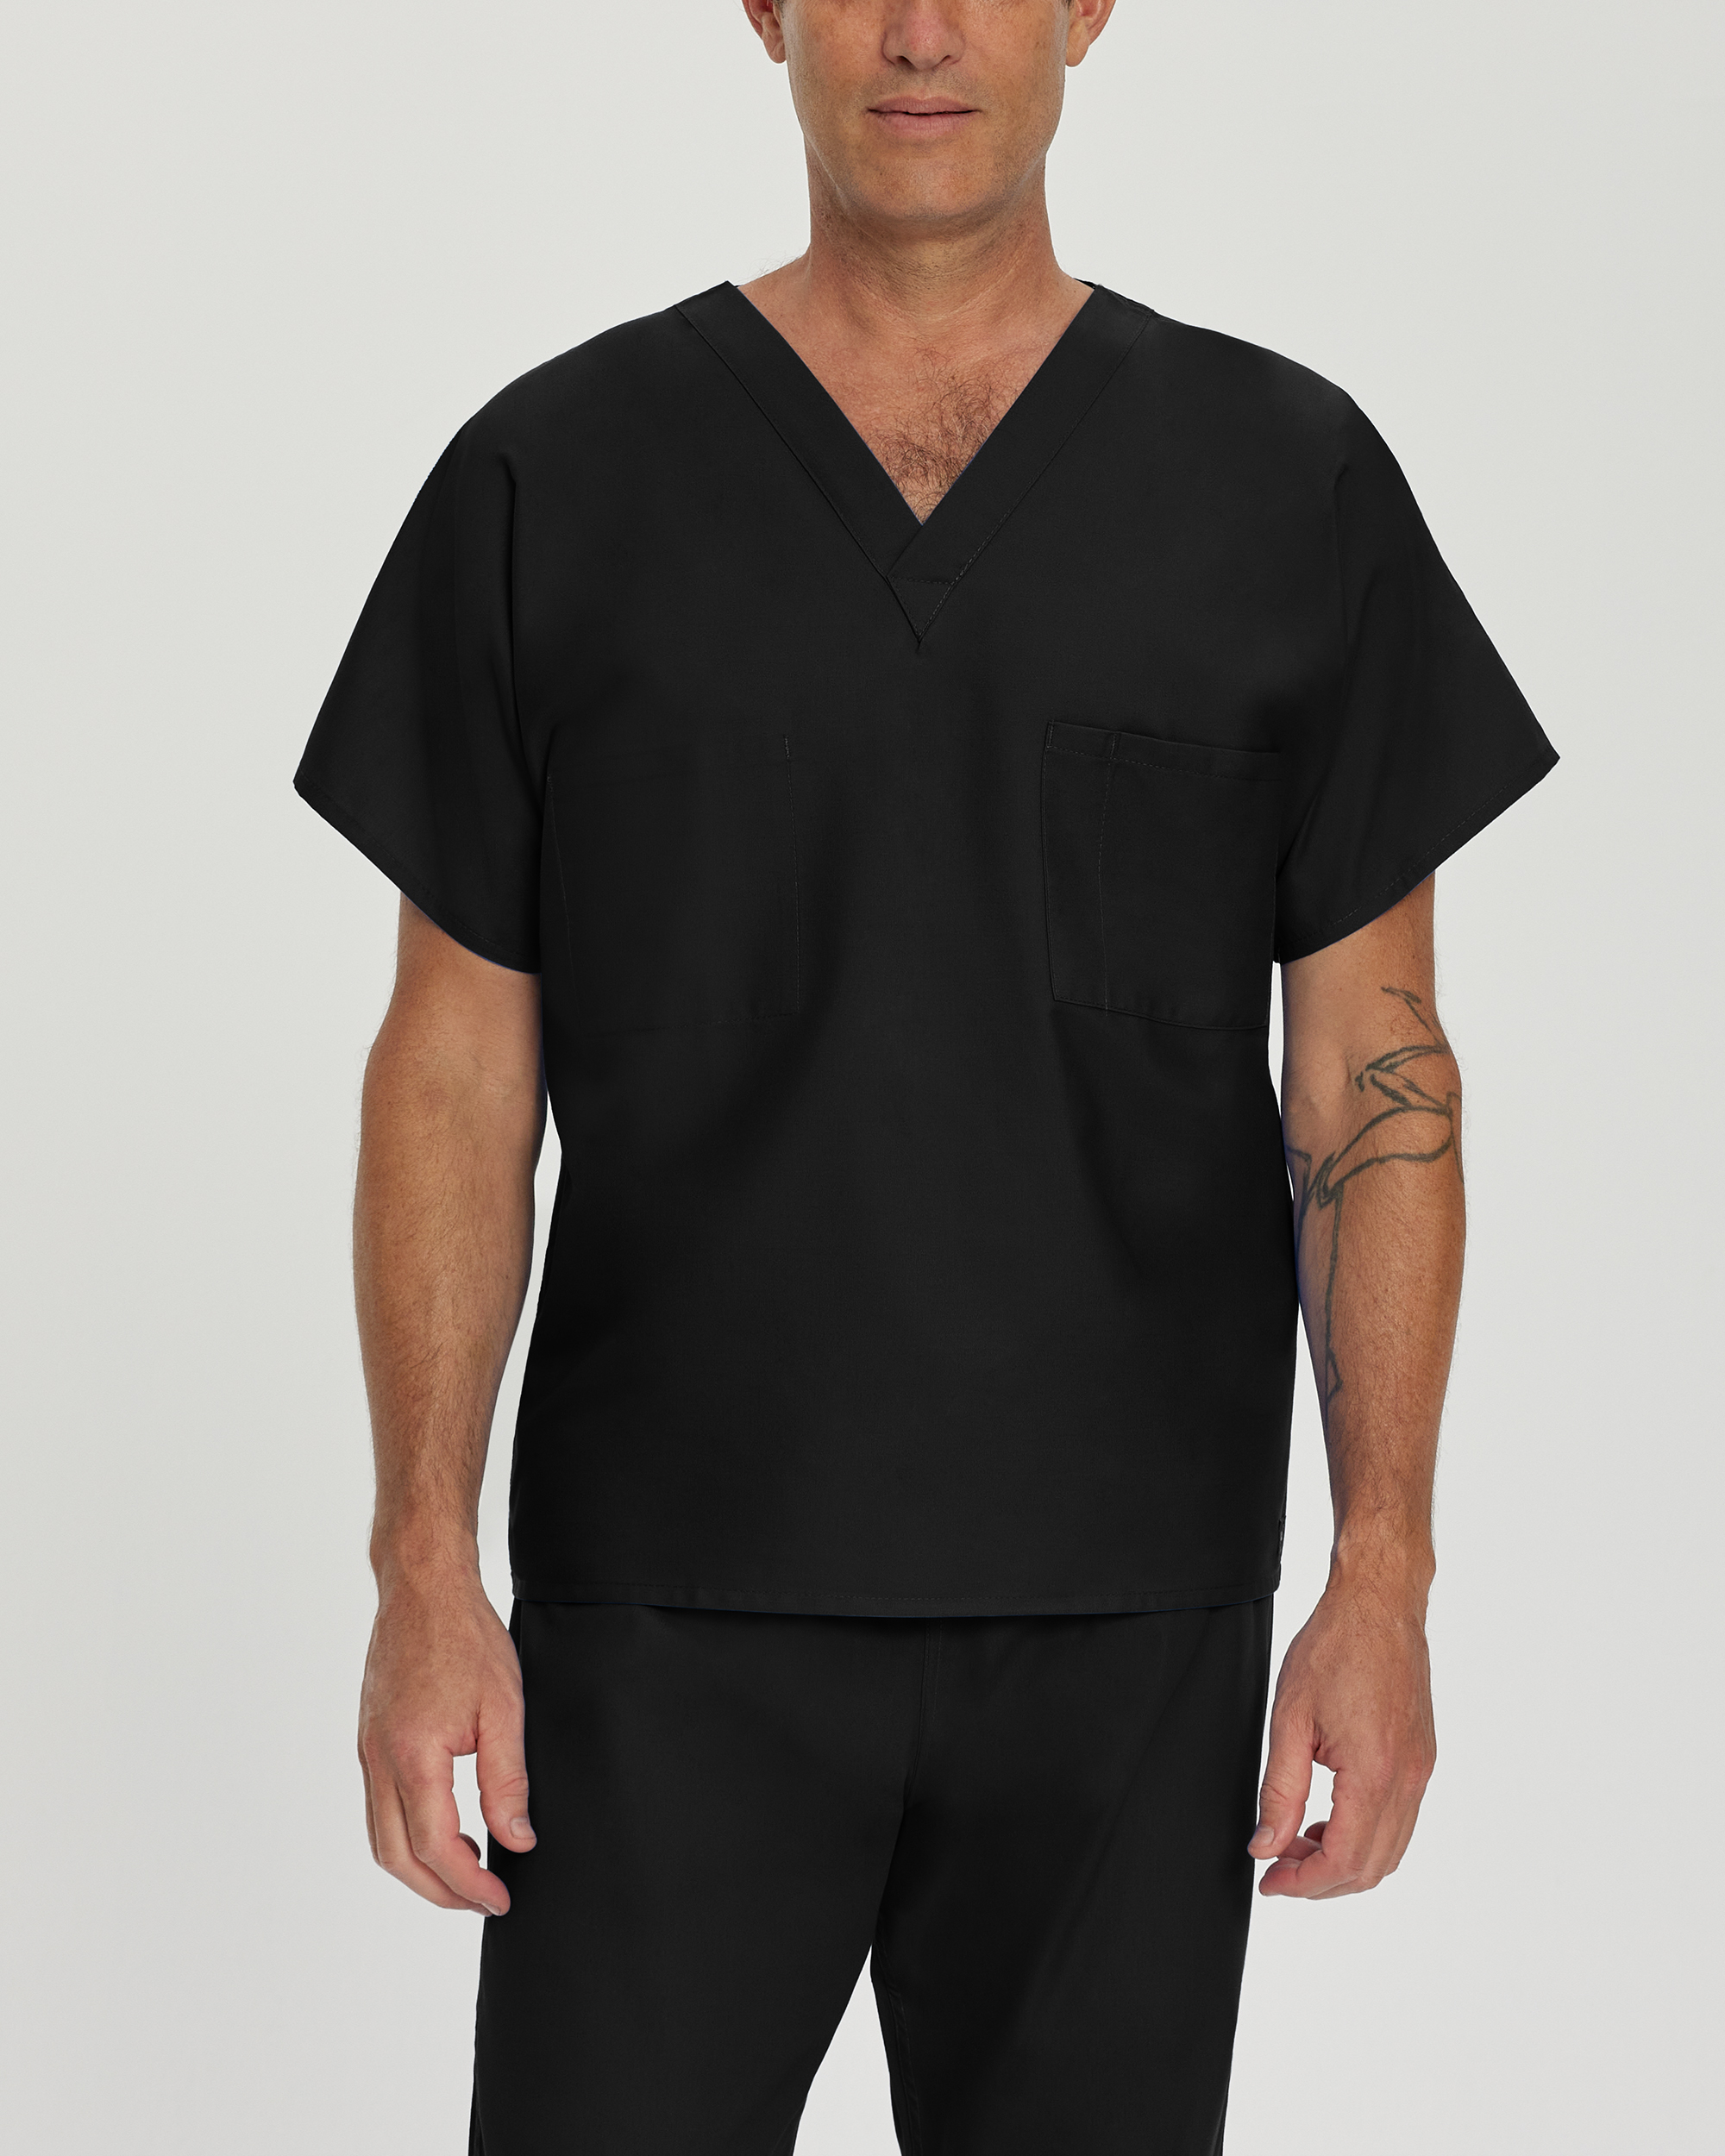 Is the Landau V-neck scrub shirt a classic or relaxed fit?